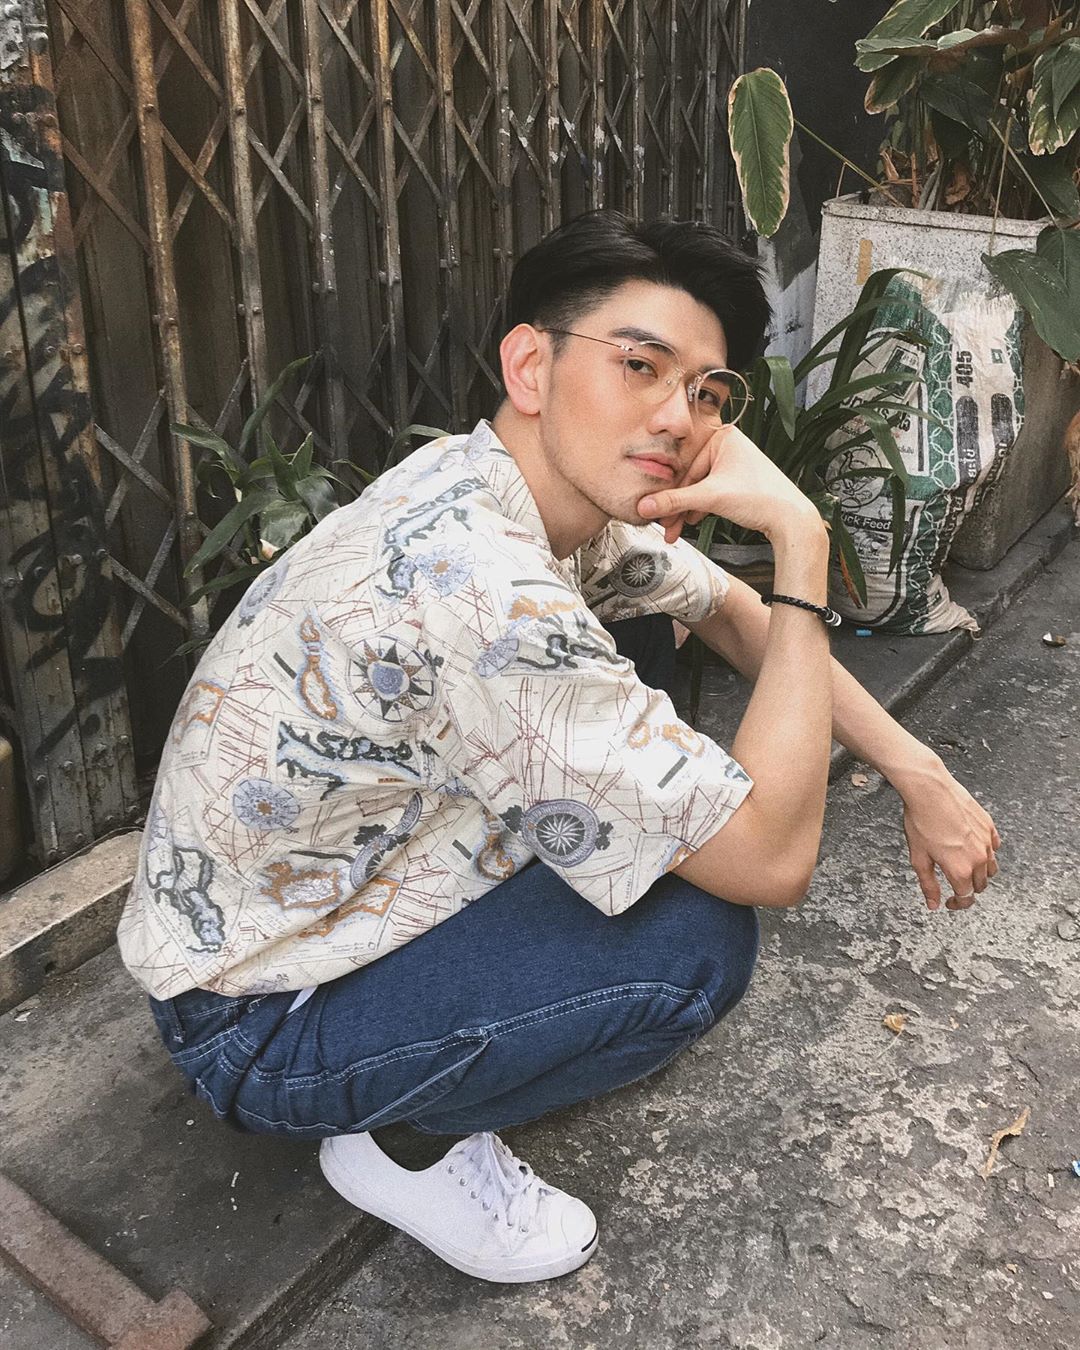 me wuv you: Mike Chinnarat Siriphongchawalit Profile and Facts